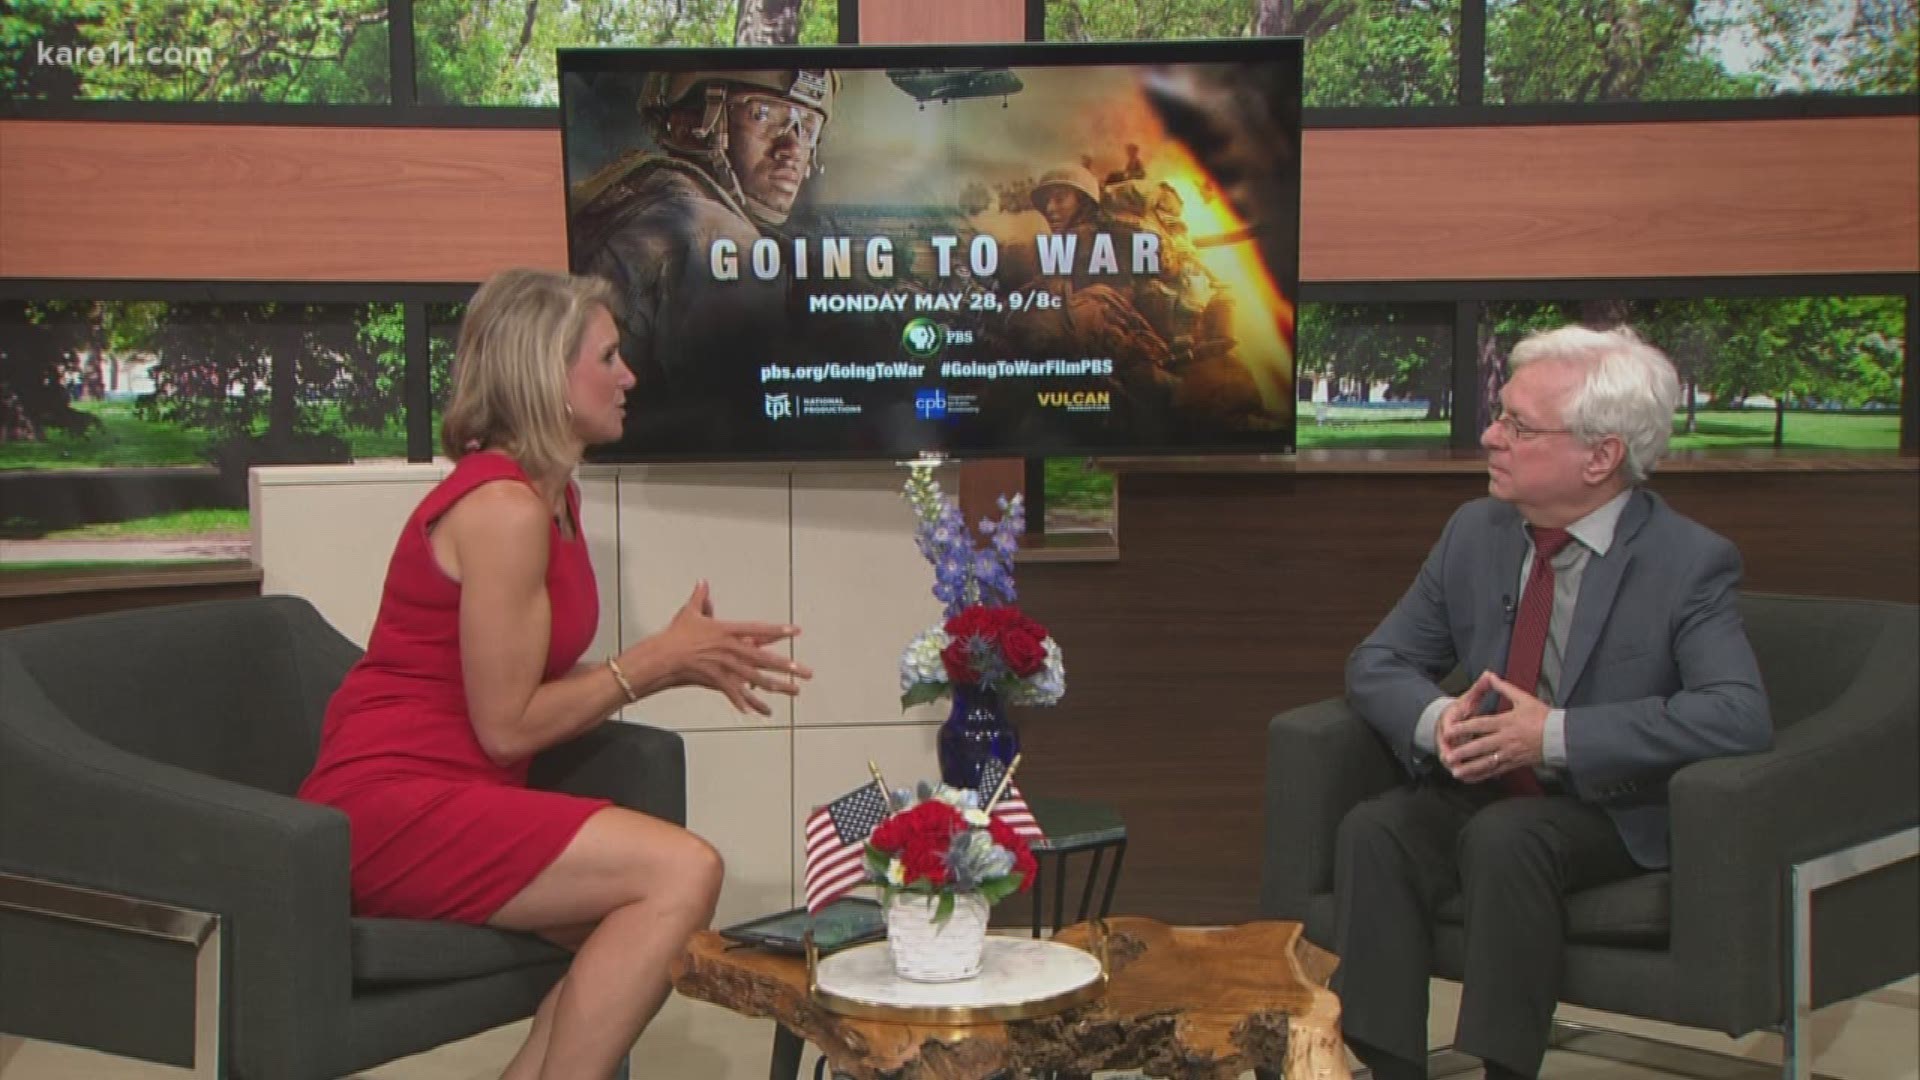 Gerry Richman from TPT comes in to talk with Belinda Jensen about "Going To War", an upcoming documentary that looks at the experiences of soldiers.